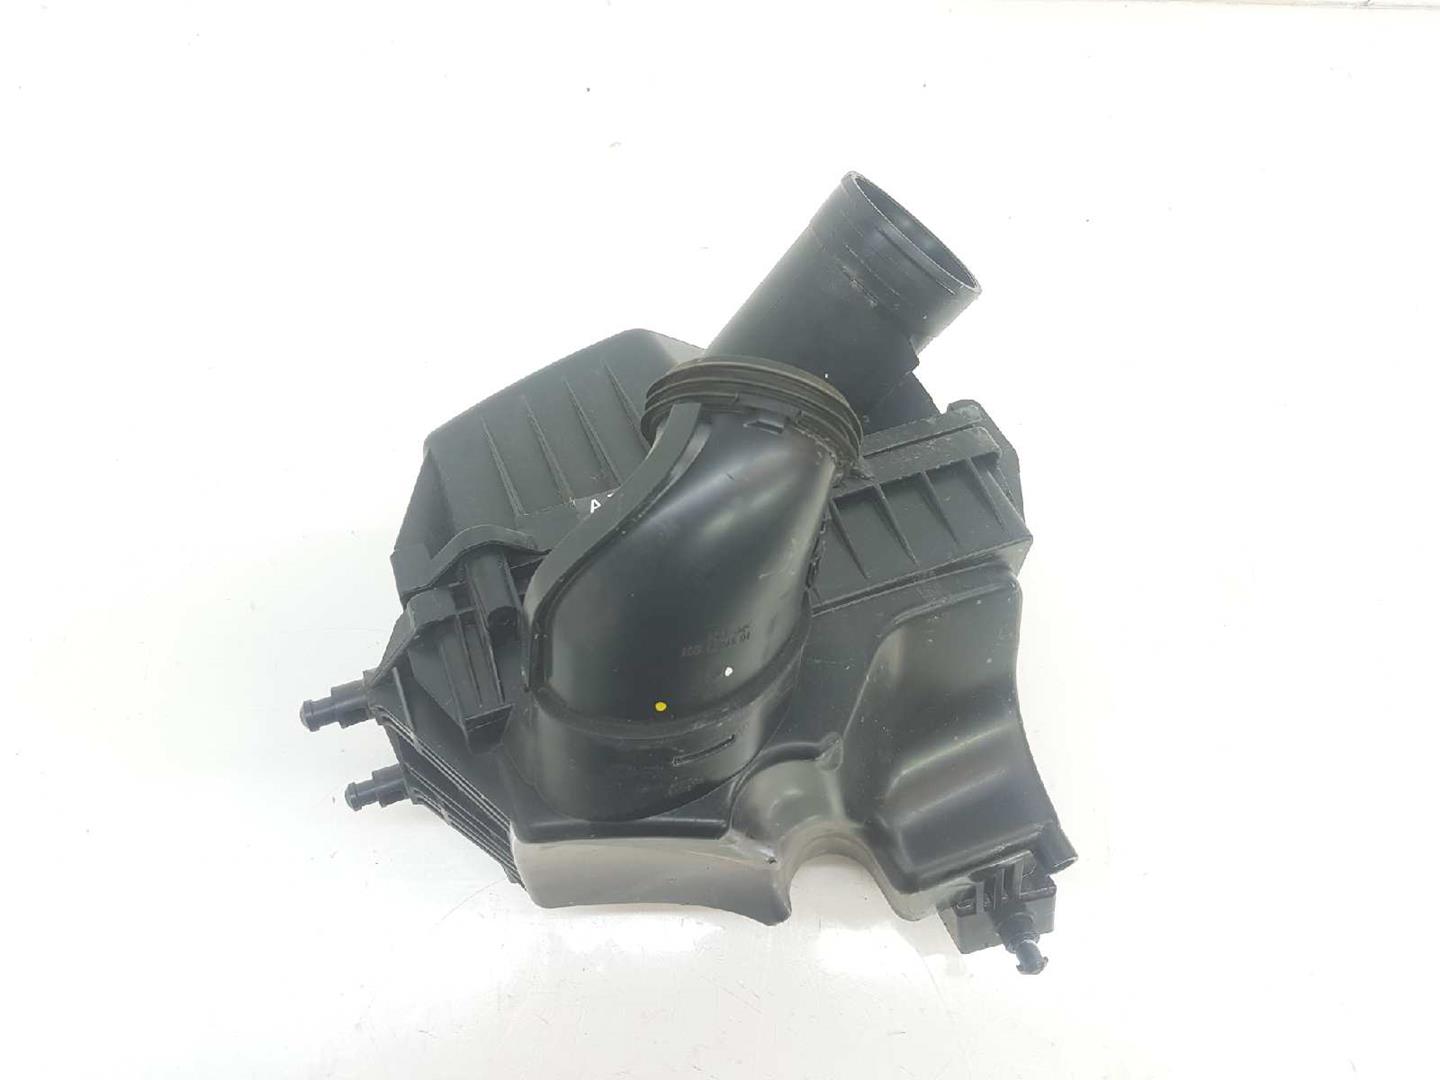 OPEL Mokka 1 generation (2012-2015) Other Engine Compartment Parts 13484478, 834922 19718045